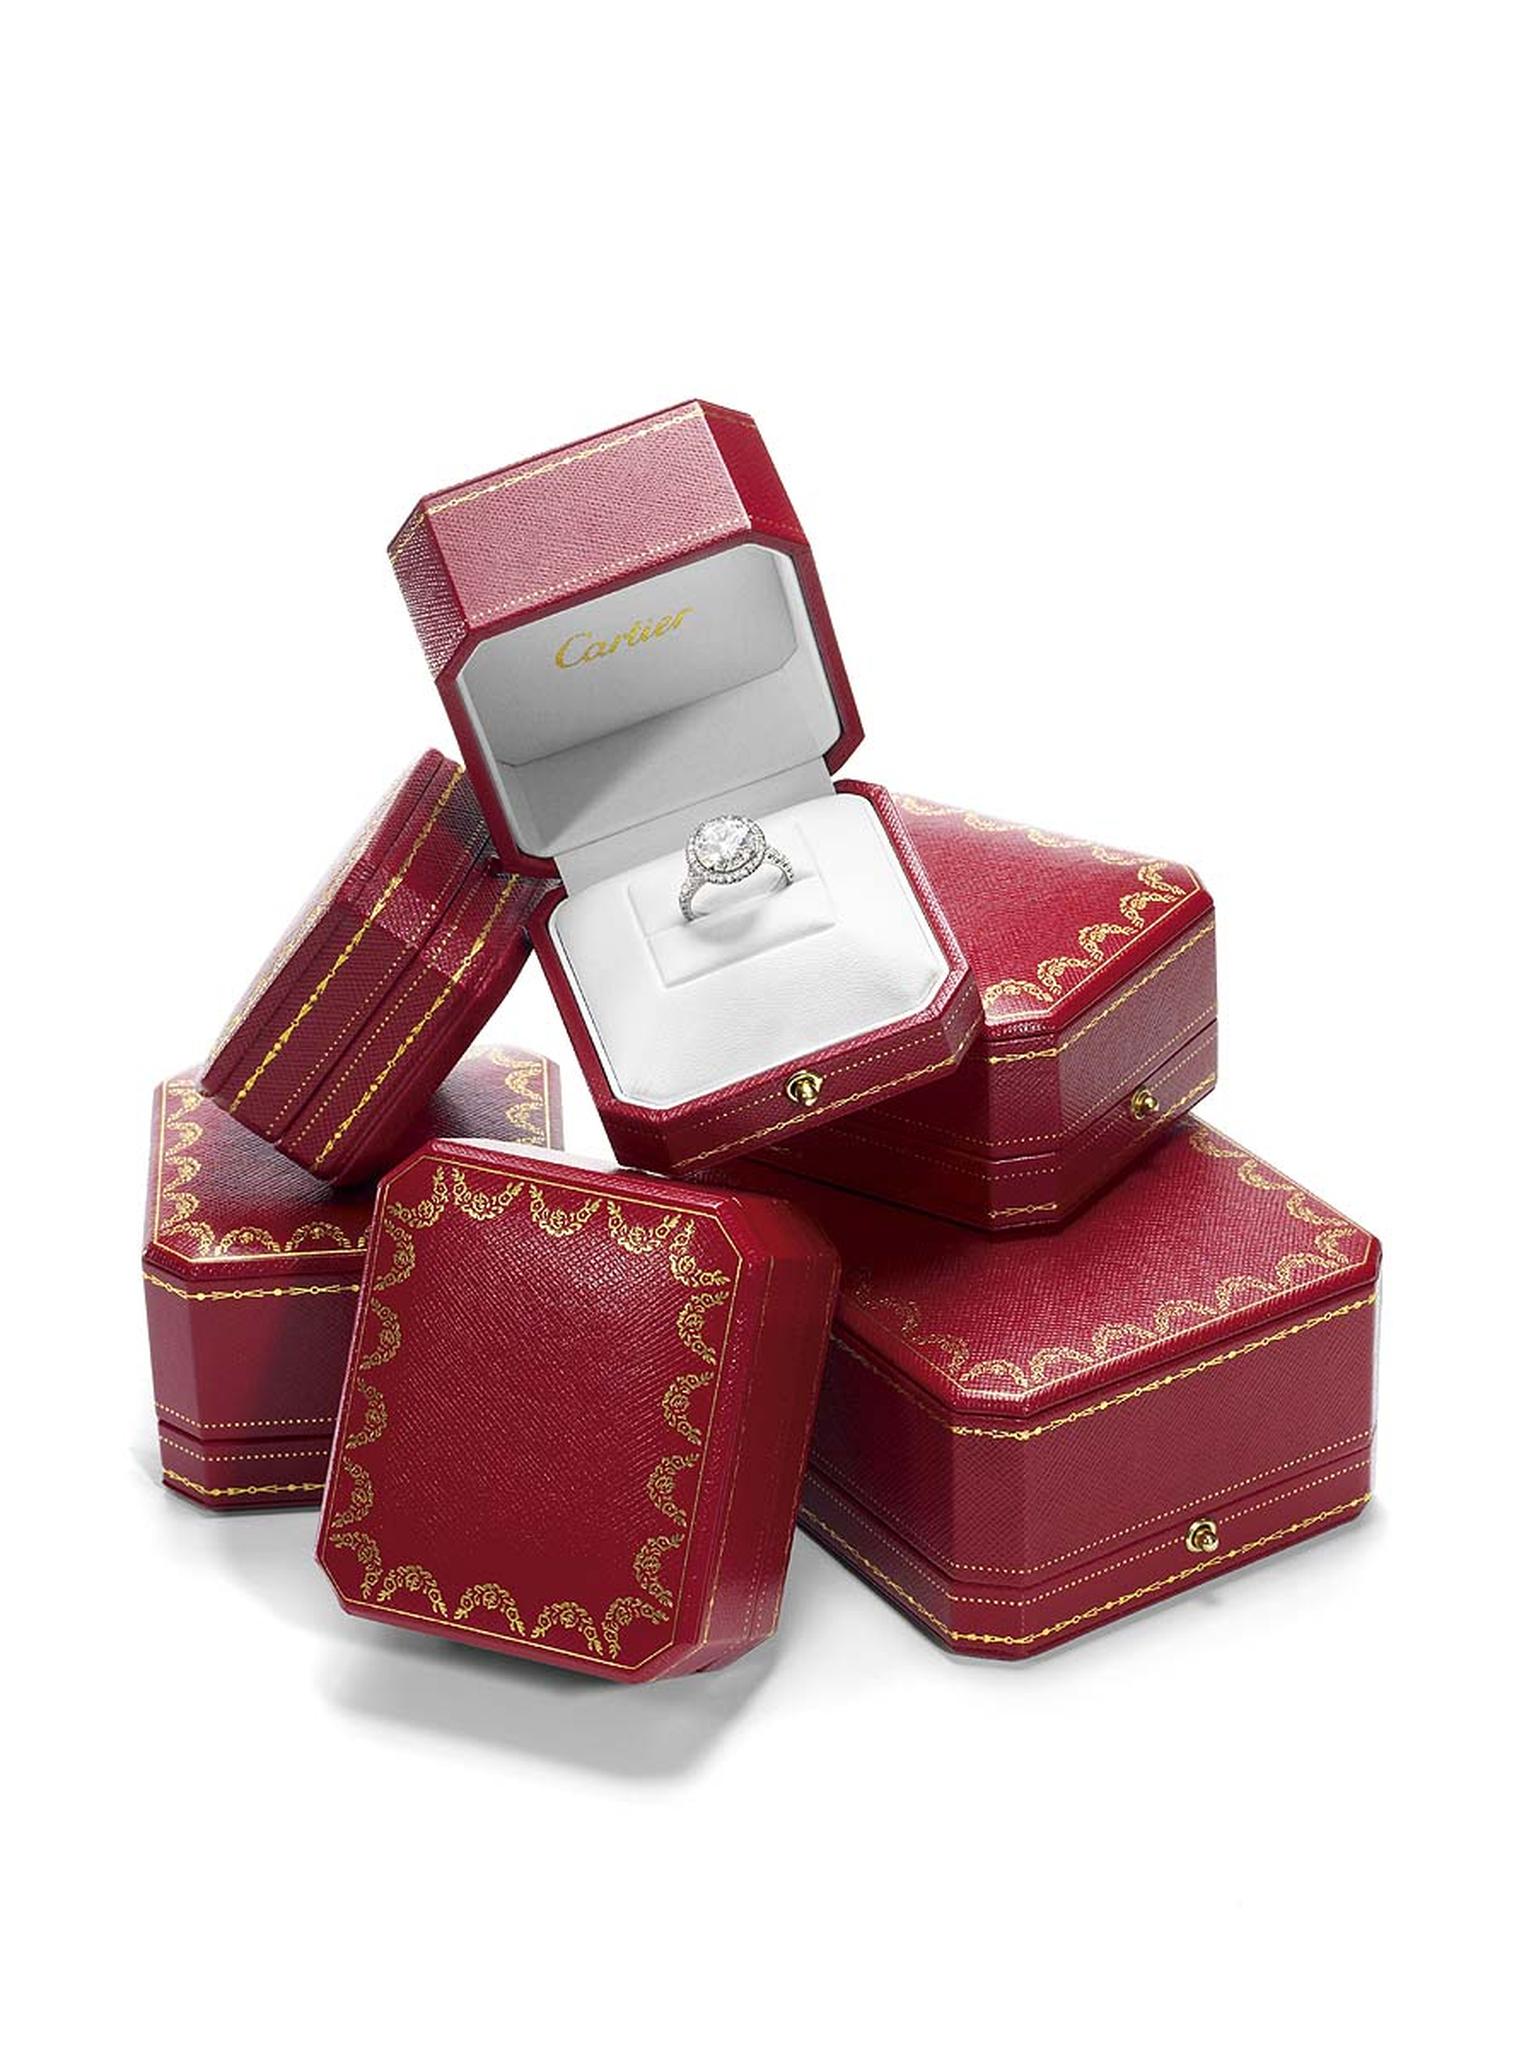 cartier red box history